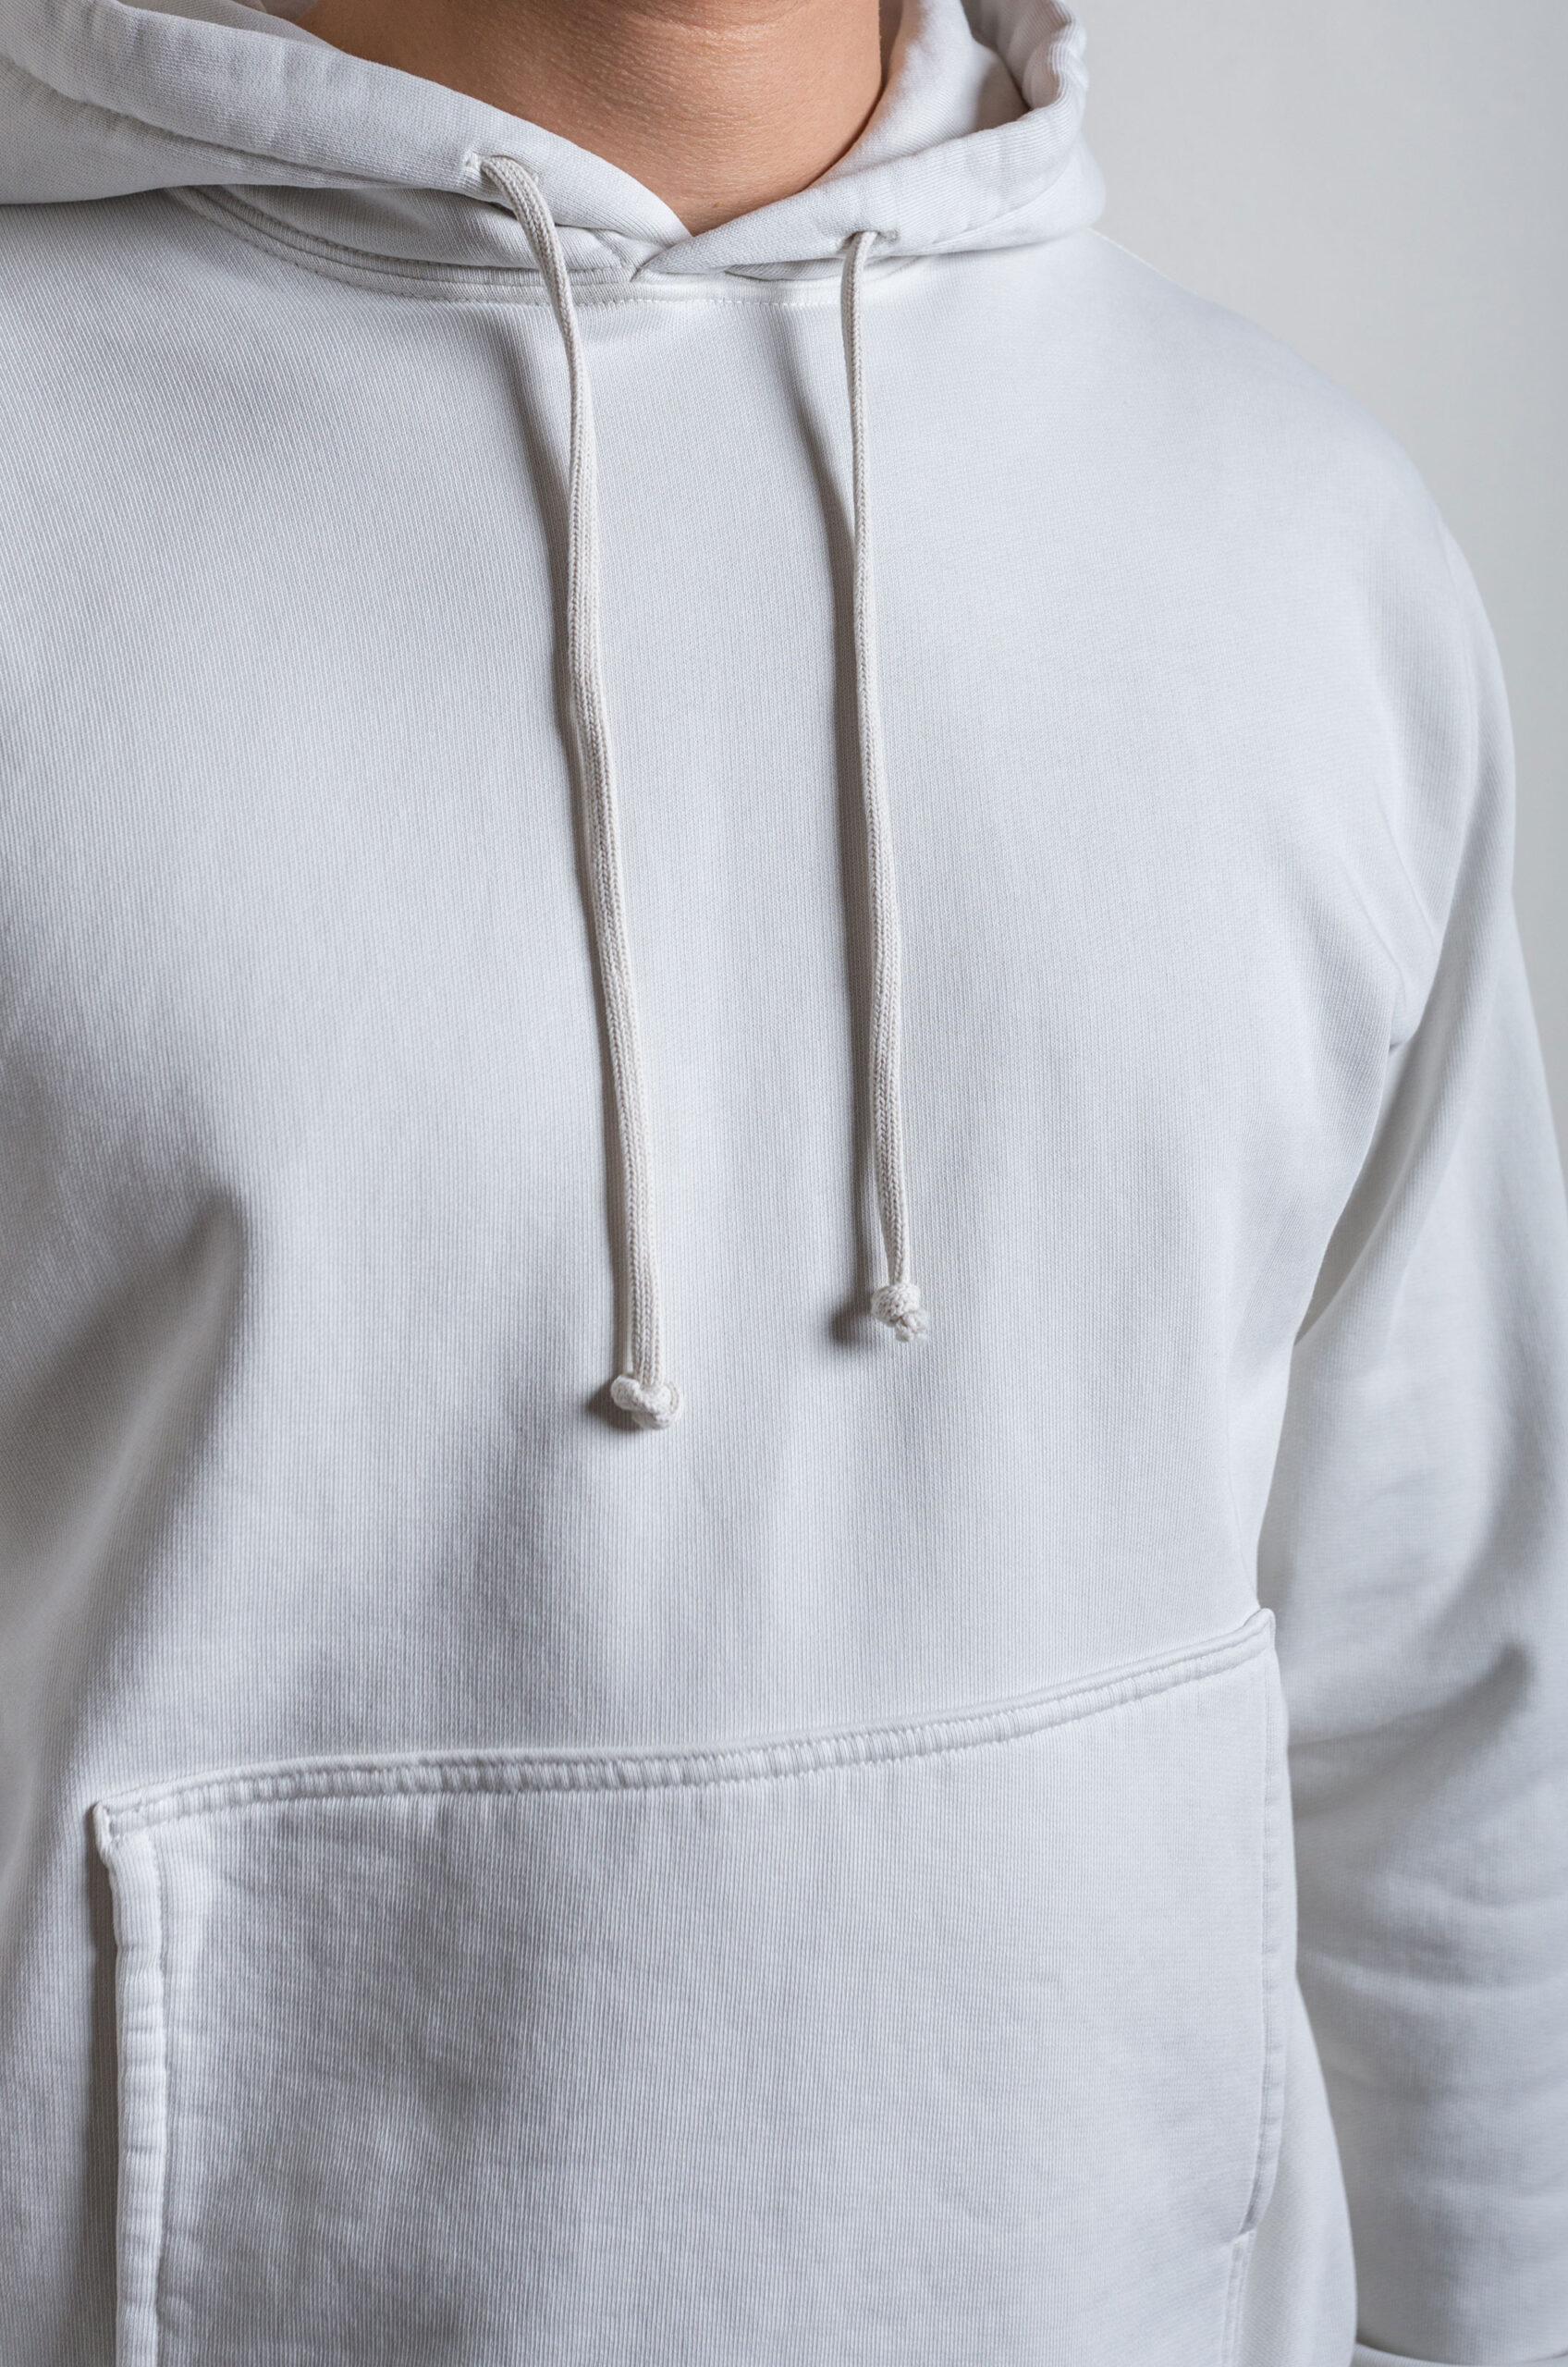 Lady White Co. LWC Hoodie Off White - Made in USA, Knits & Loungewear